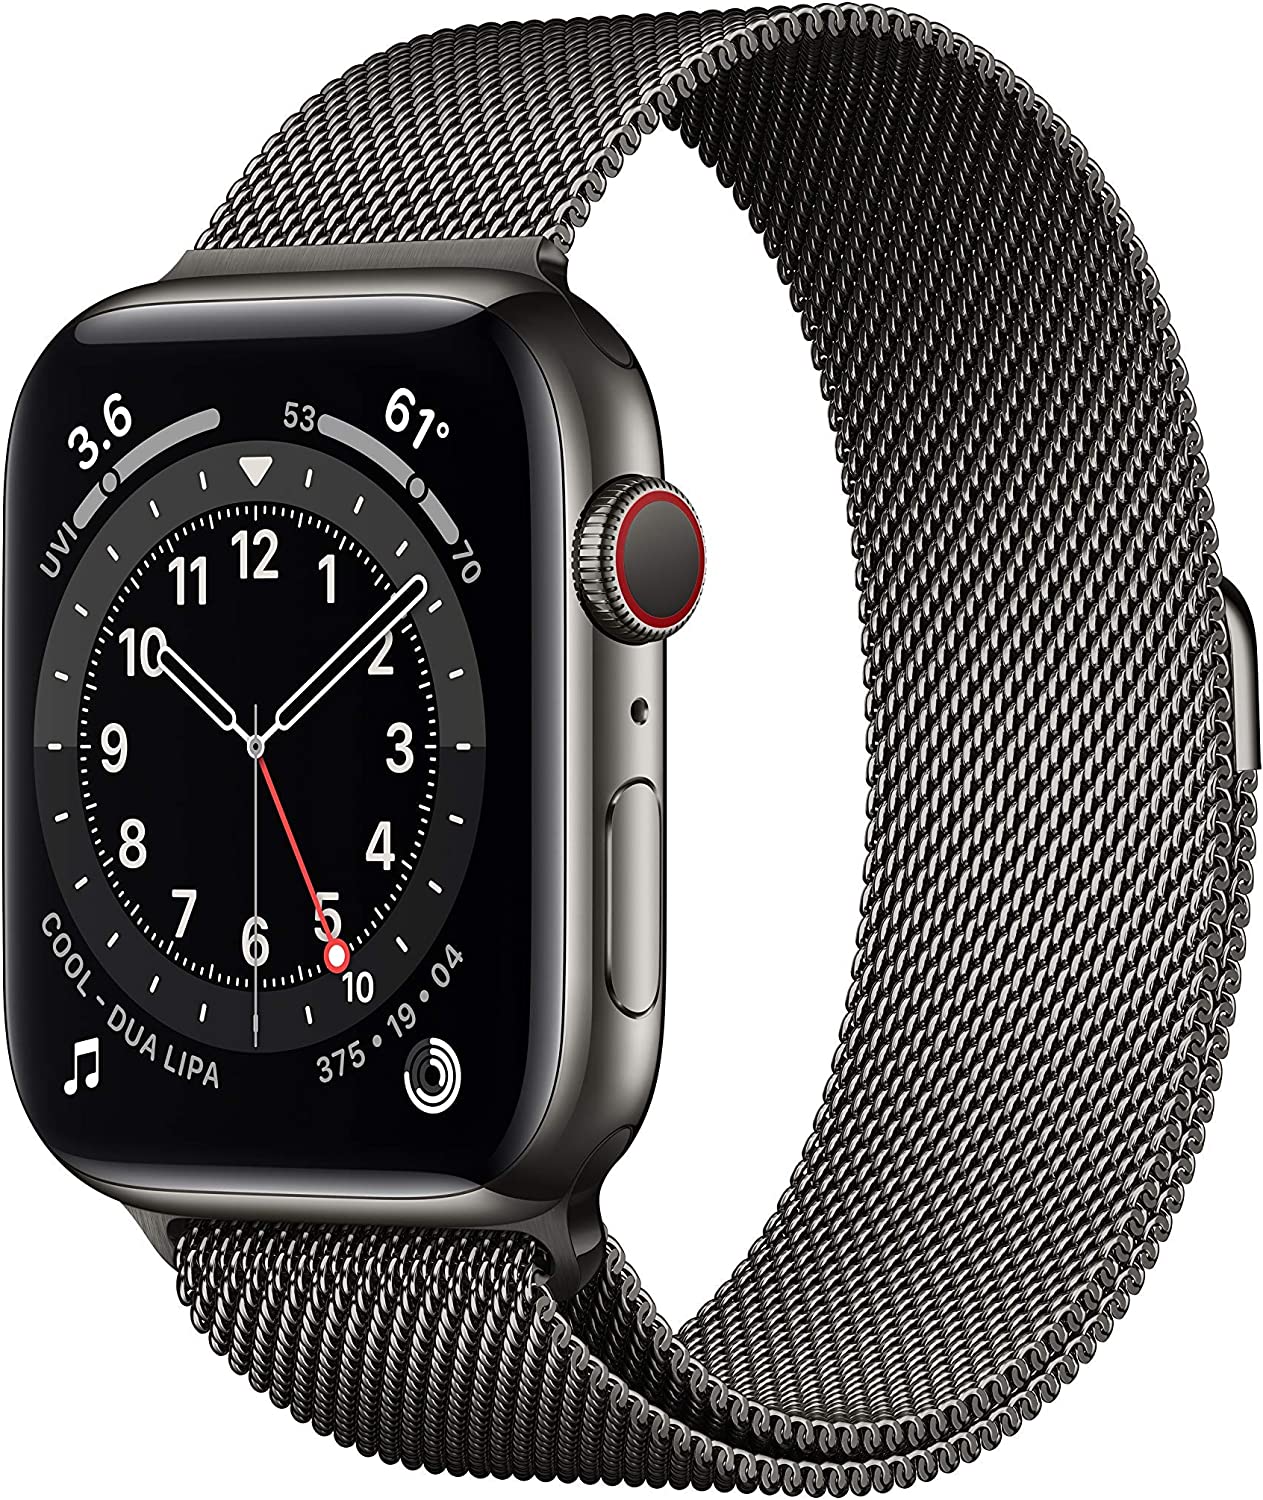 Apple Watch Series 6 (2020) 44mm GPS + Cellular - Graphite Stainless Steel Case &amp; Graphite Milanese Loop (New)